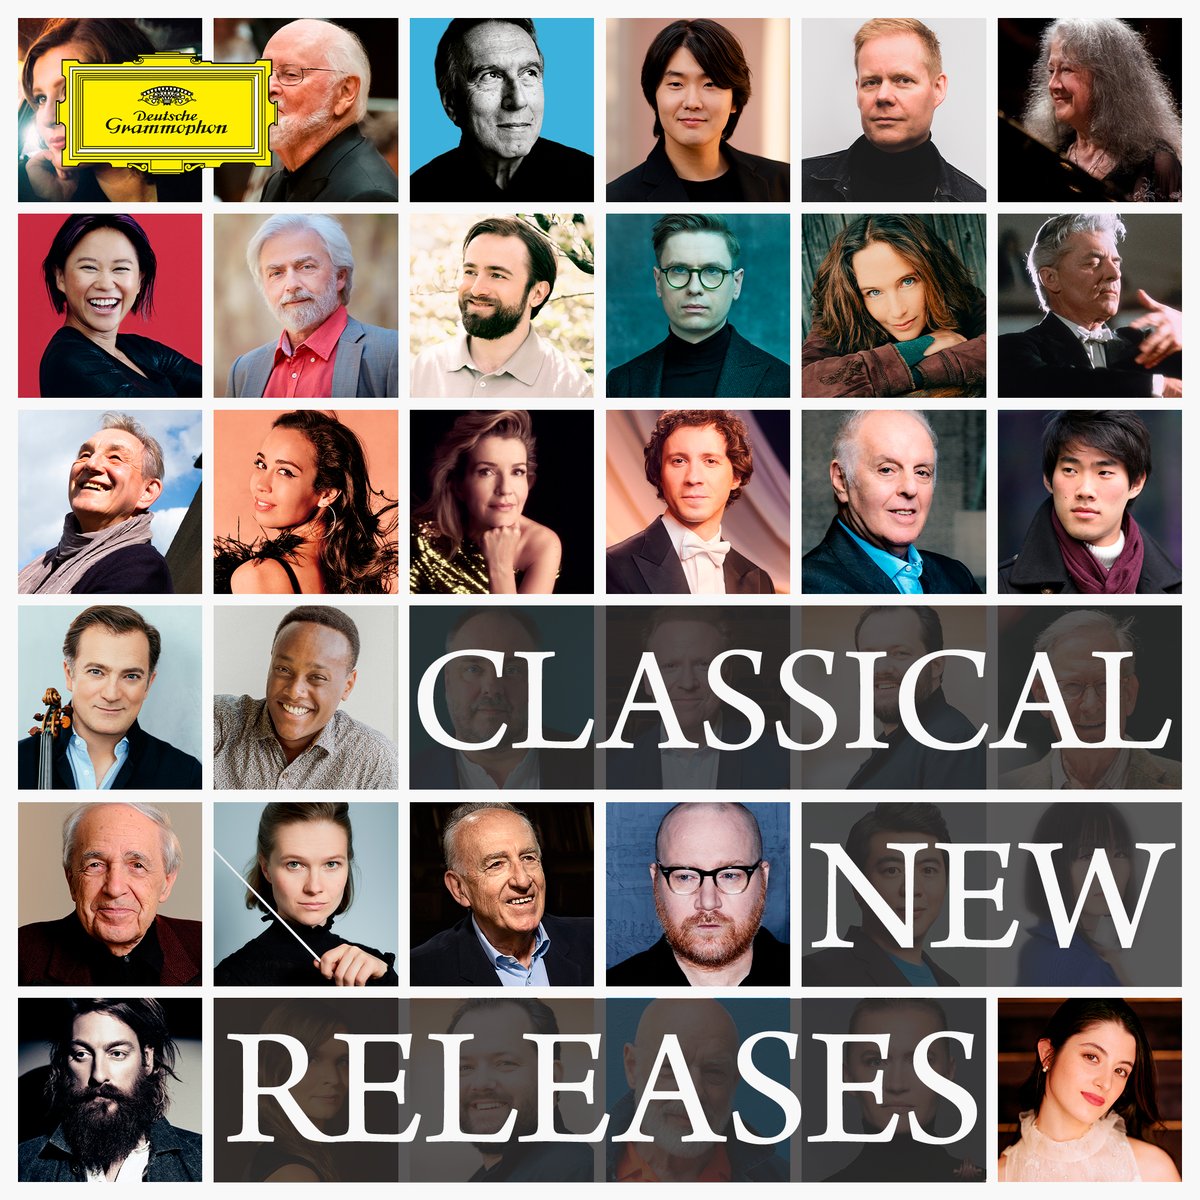 Lean back and dive into our 'Classical New Releases' playlist to explore new music by DG's fantastic artists. 🎧 → DG.lnk.to/classical